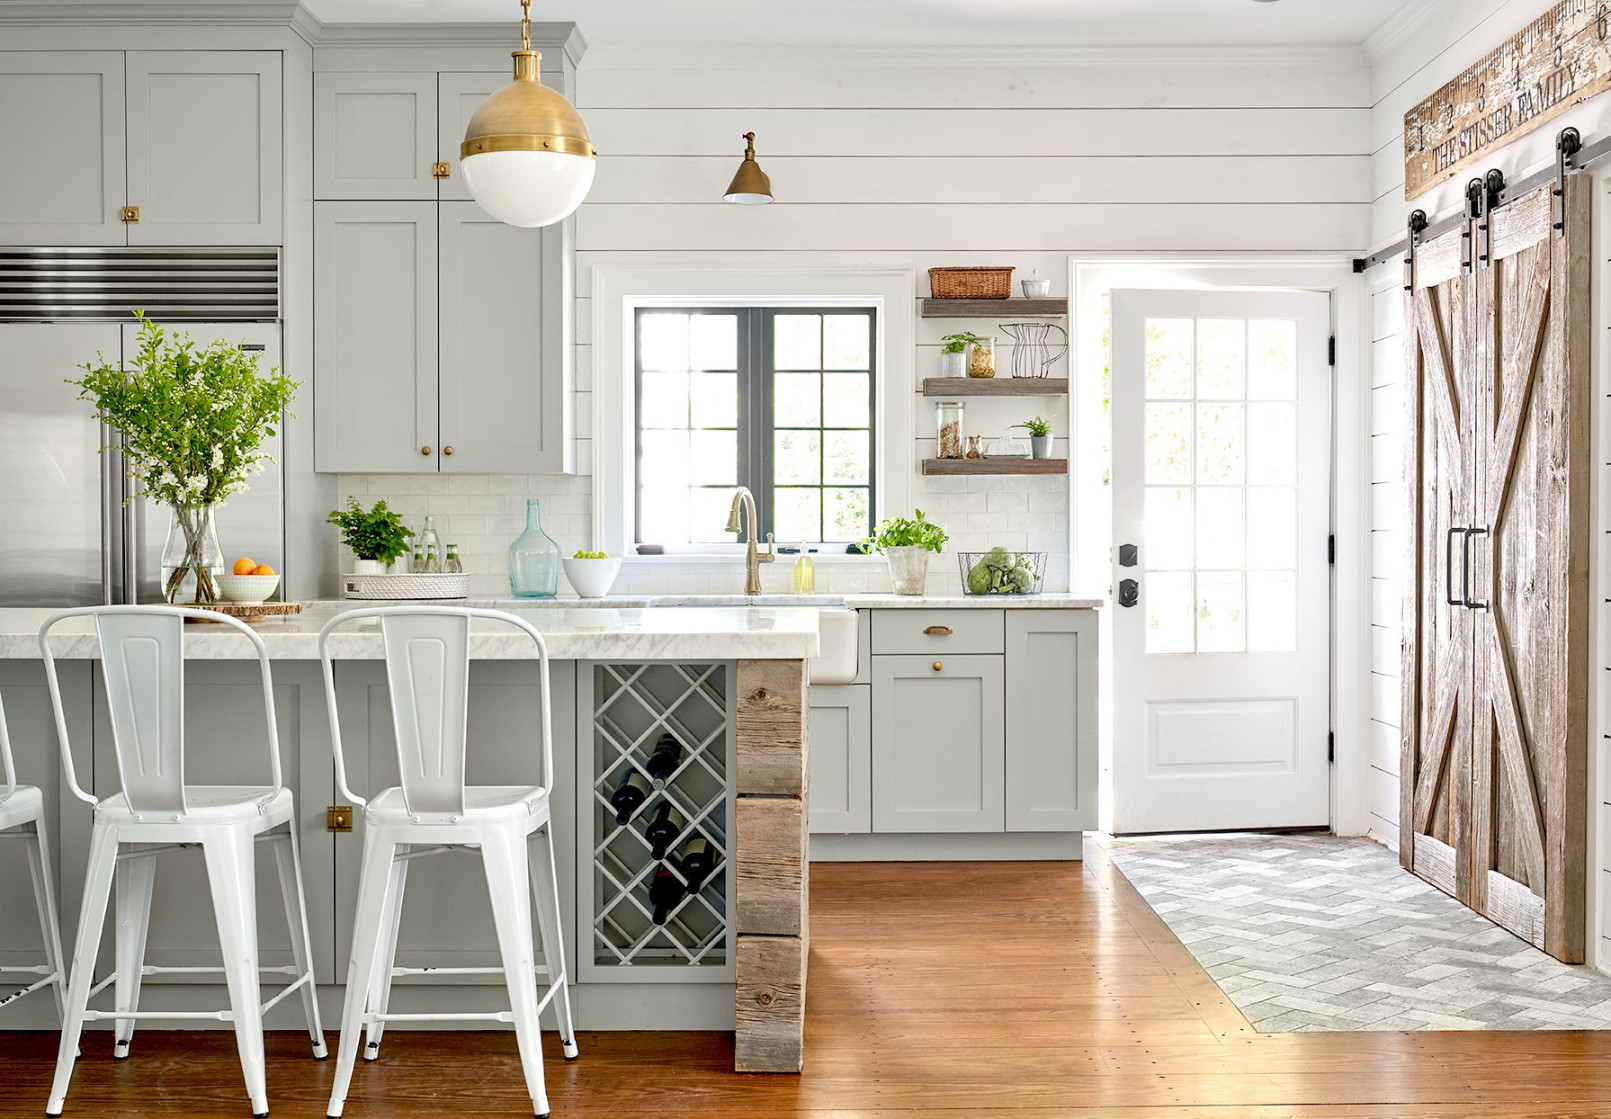 Helpful Tips for Choosing the Coziest Farmhouse Kitchen Colors